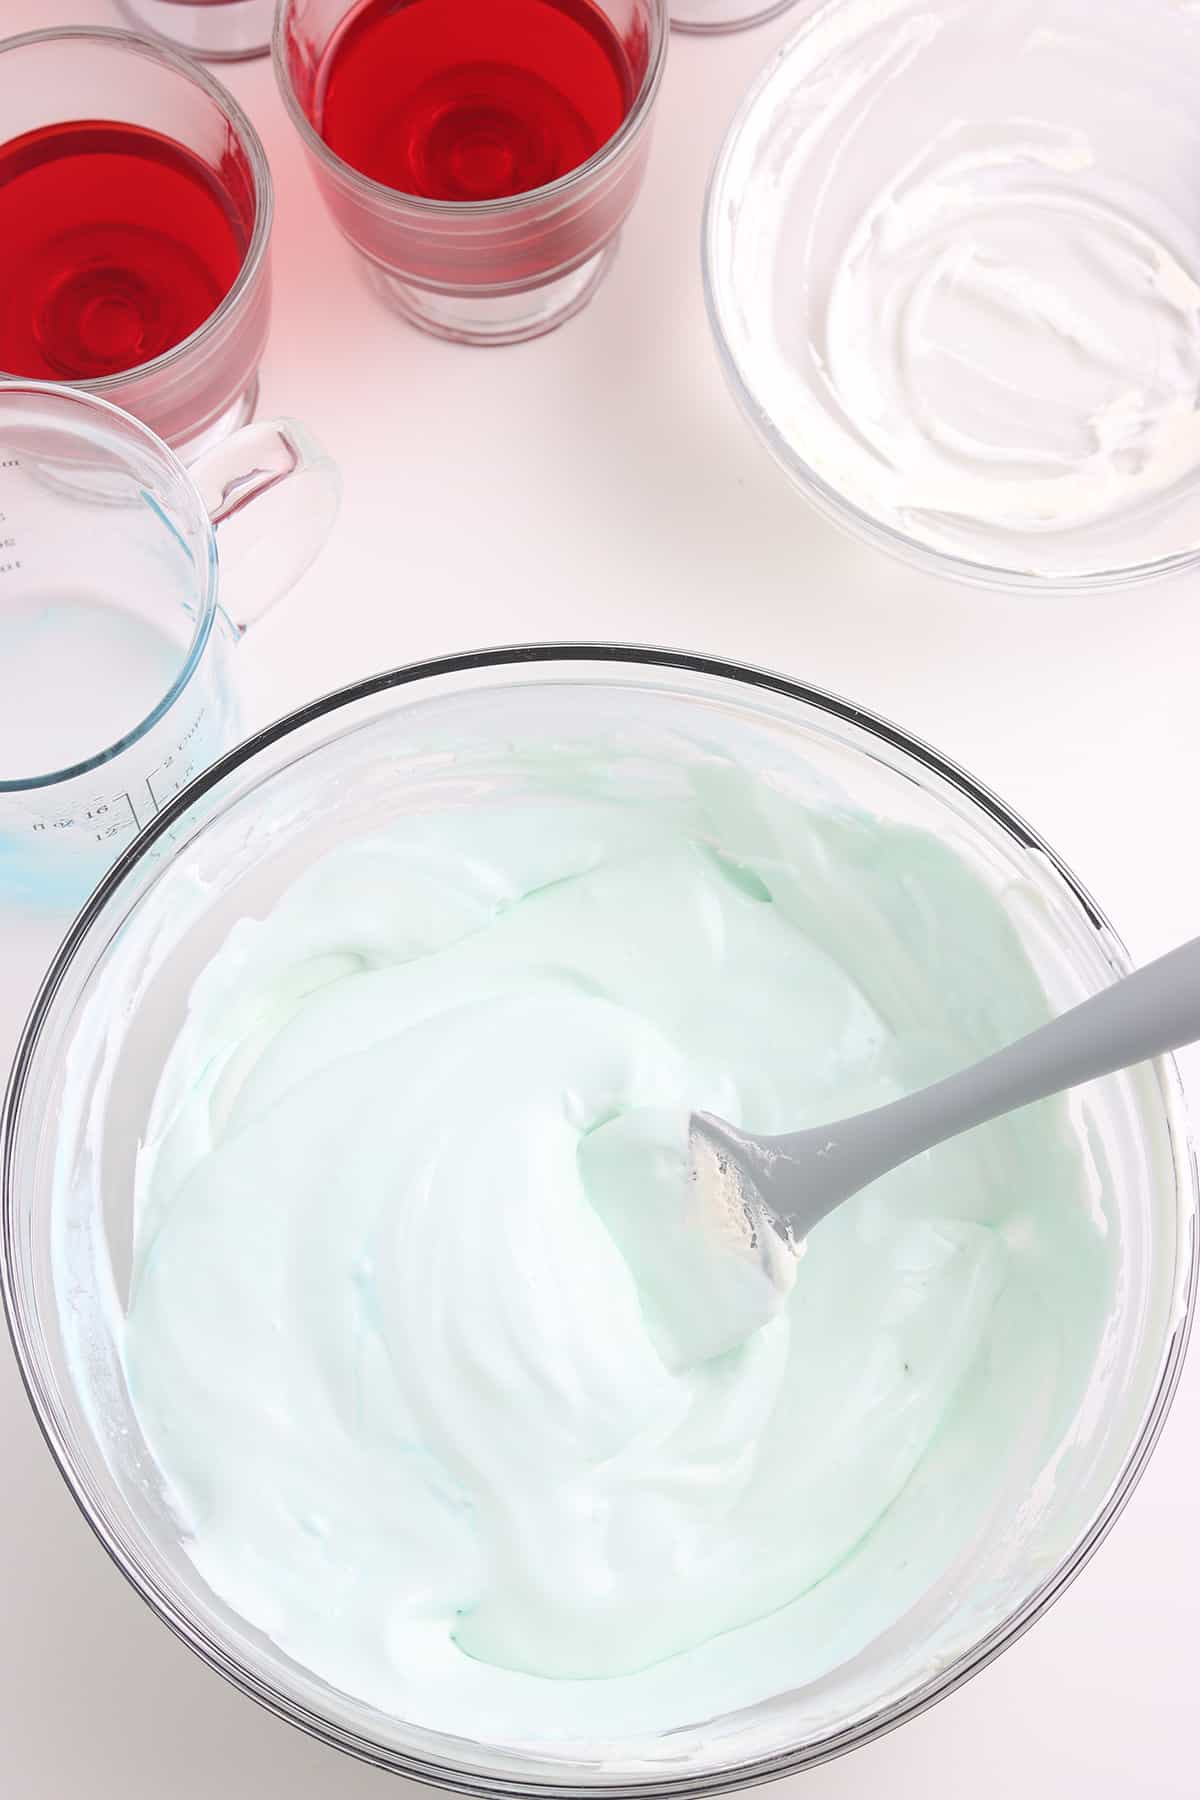 Blended blue gelatin and whipped topping.